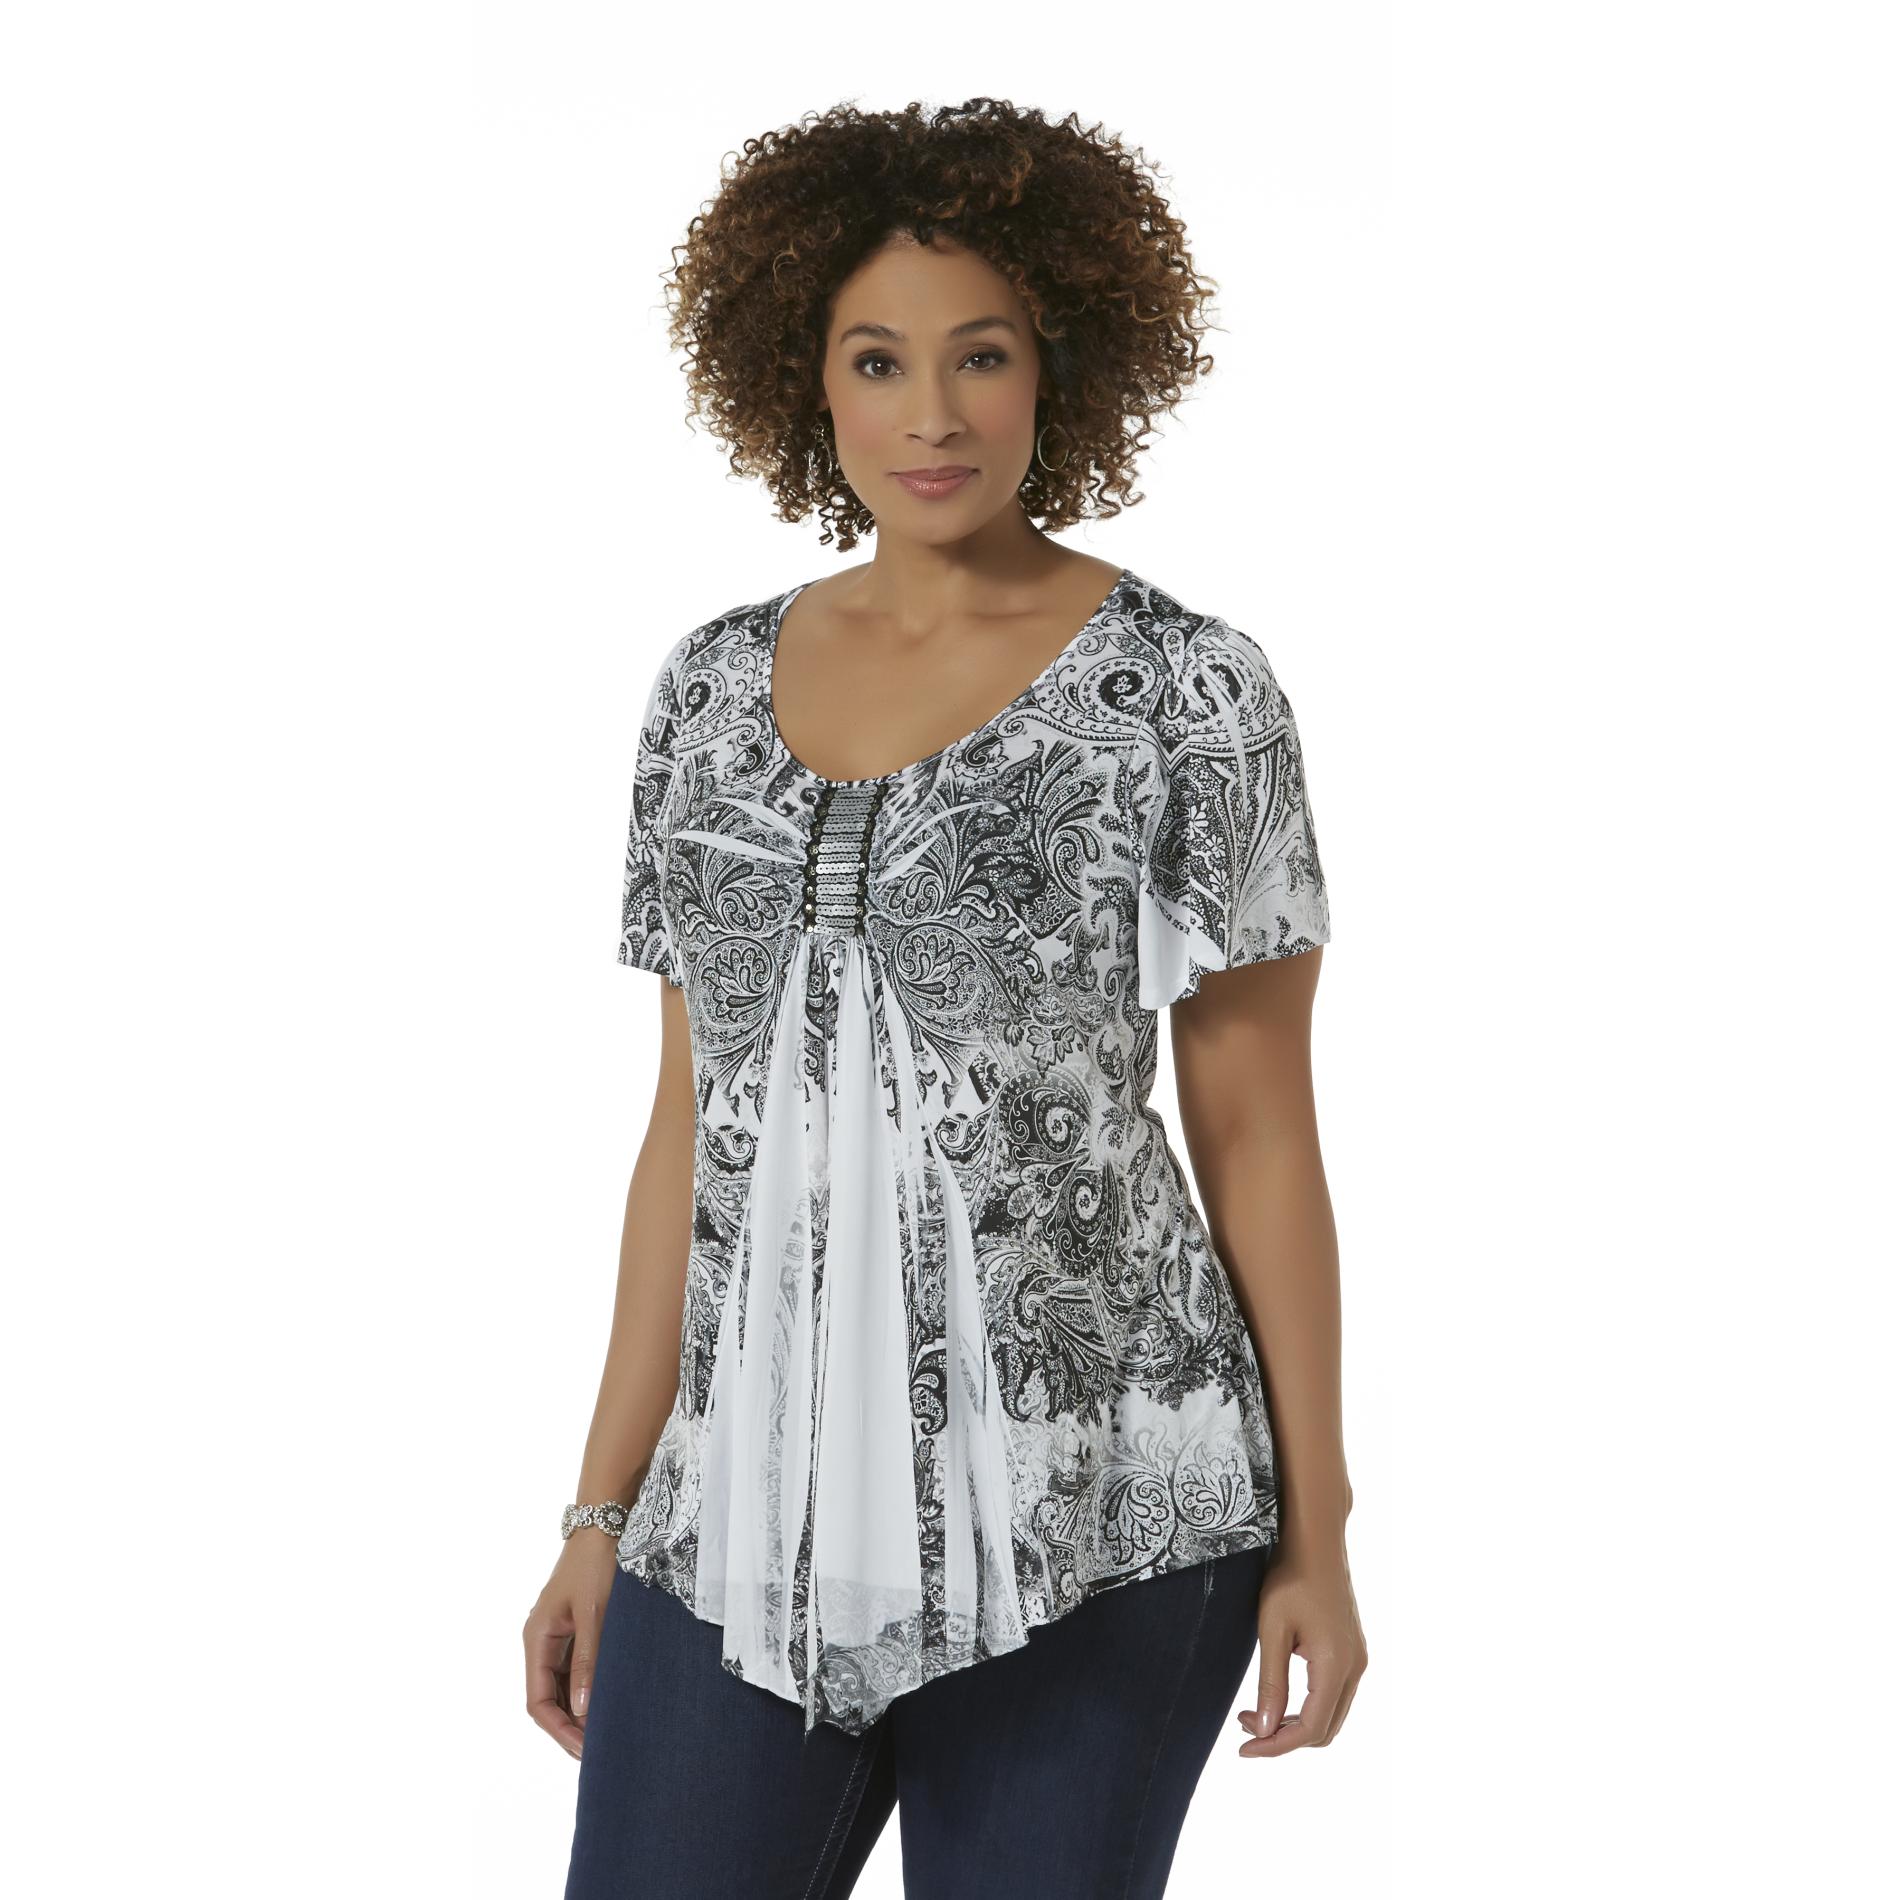 Live and Let Live Women's Plus Embellished Short-Sleeve Top